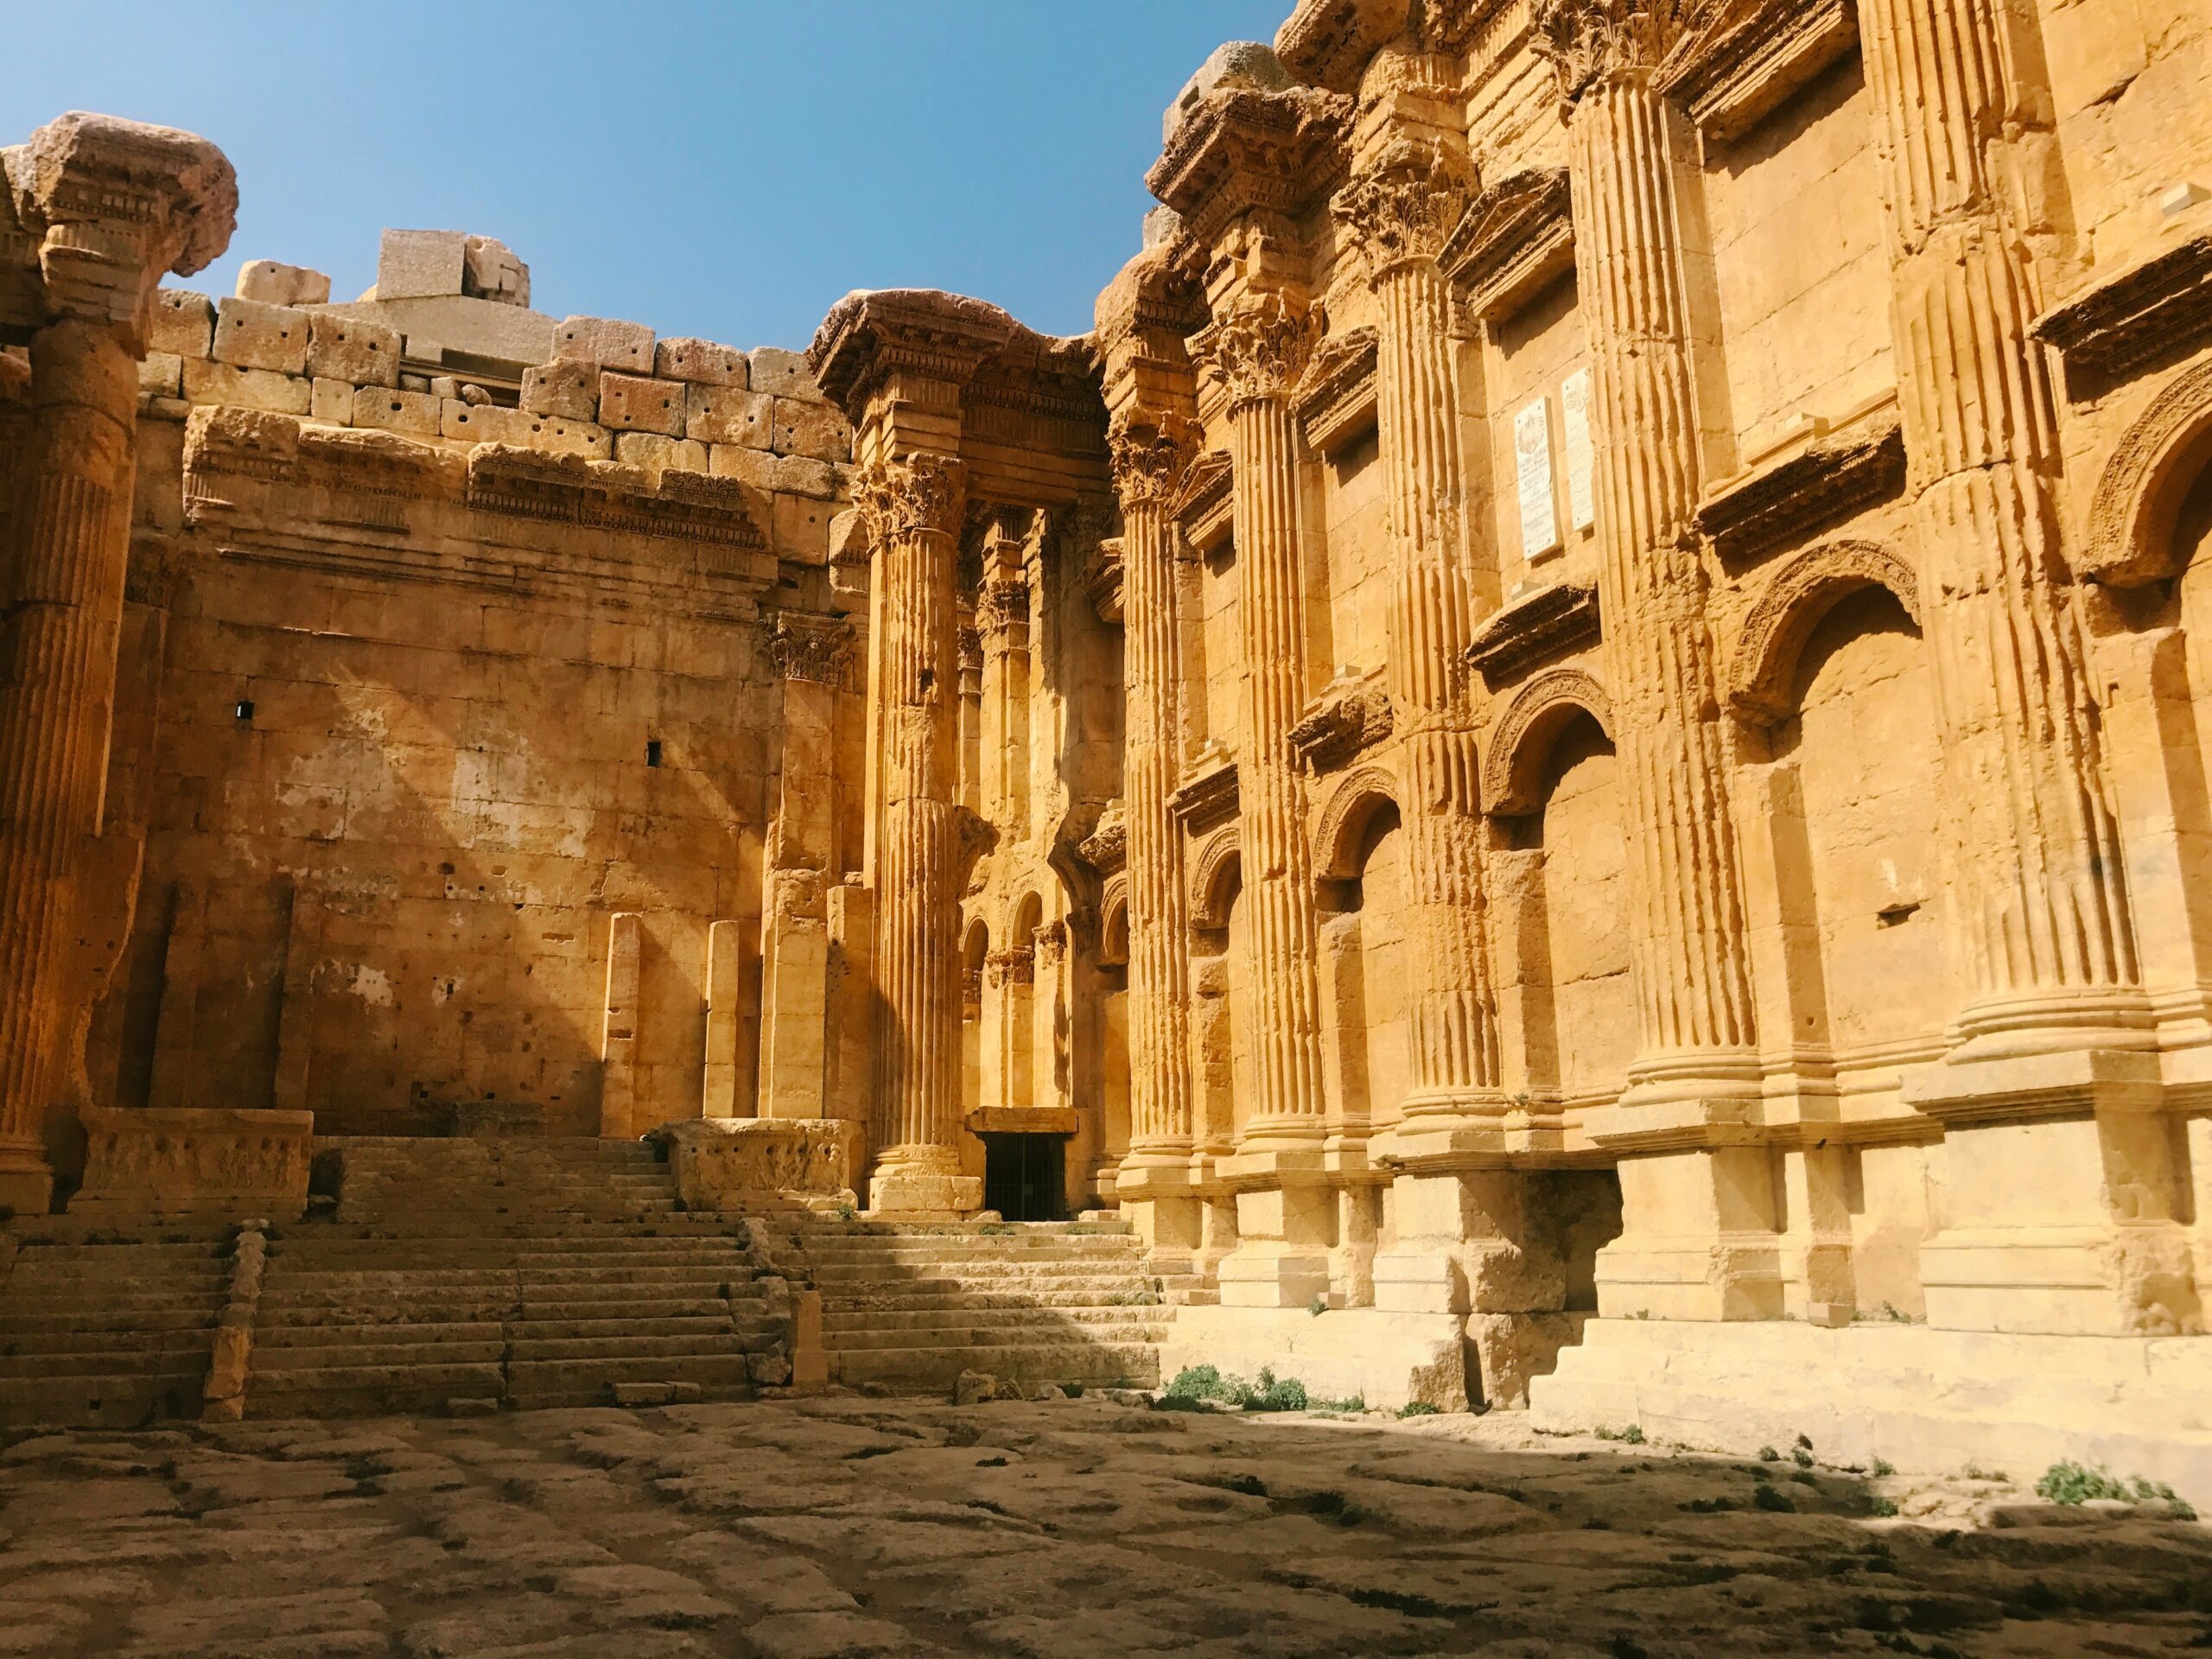 Baalbek, now Lebanon, is a Roman ruin which is also a site of pilgrimage. 
pictured: The Lebanon Roman ruins, also known as Baalbek